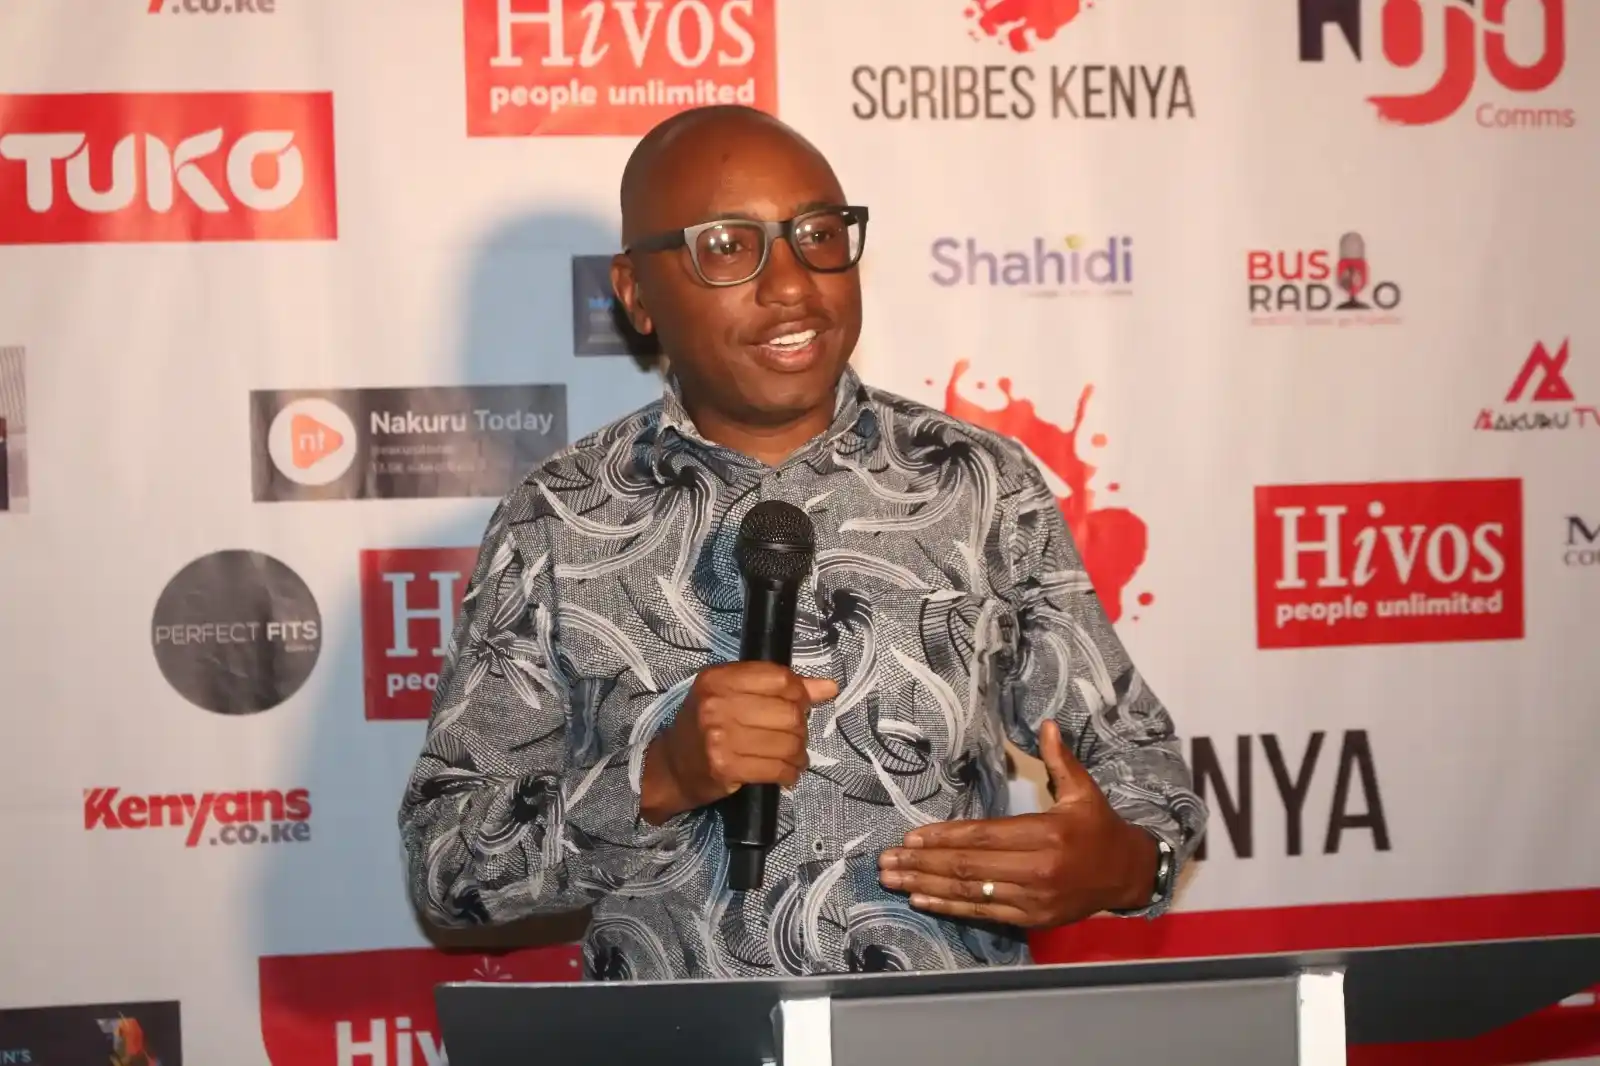 Journalists encouraged to explore digital income streams and upskill at Scribes End of Year Party, with HIVOS pledging continued support for media freedom.